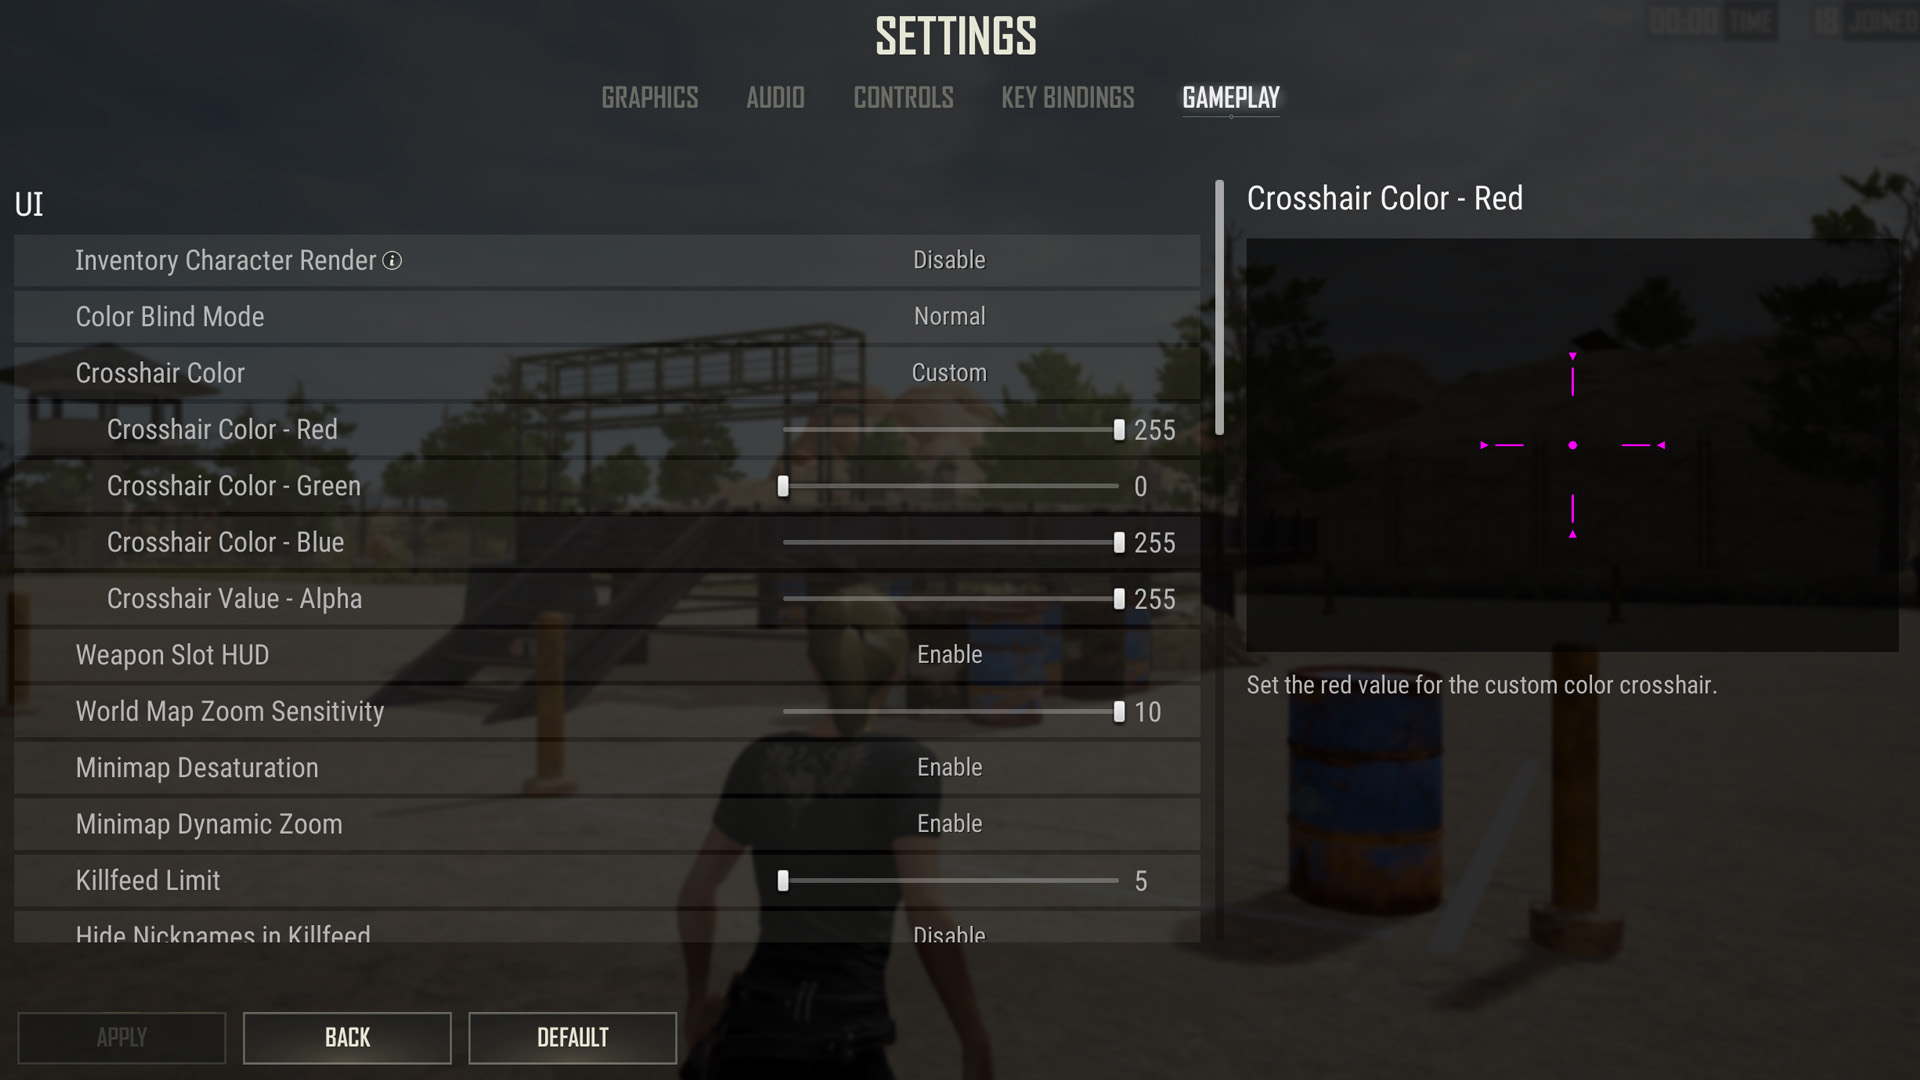 Playerunknown's battlegrounds best PUBG settings: the gameplay menu in the PUBG settings